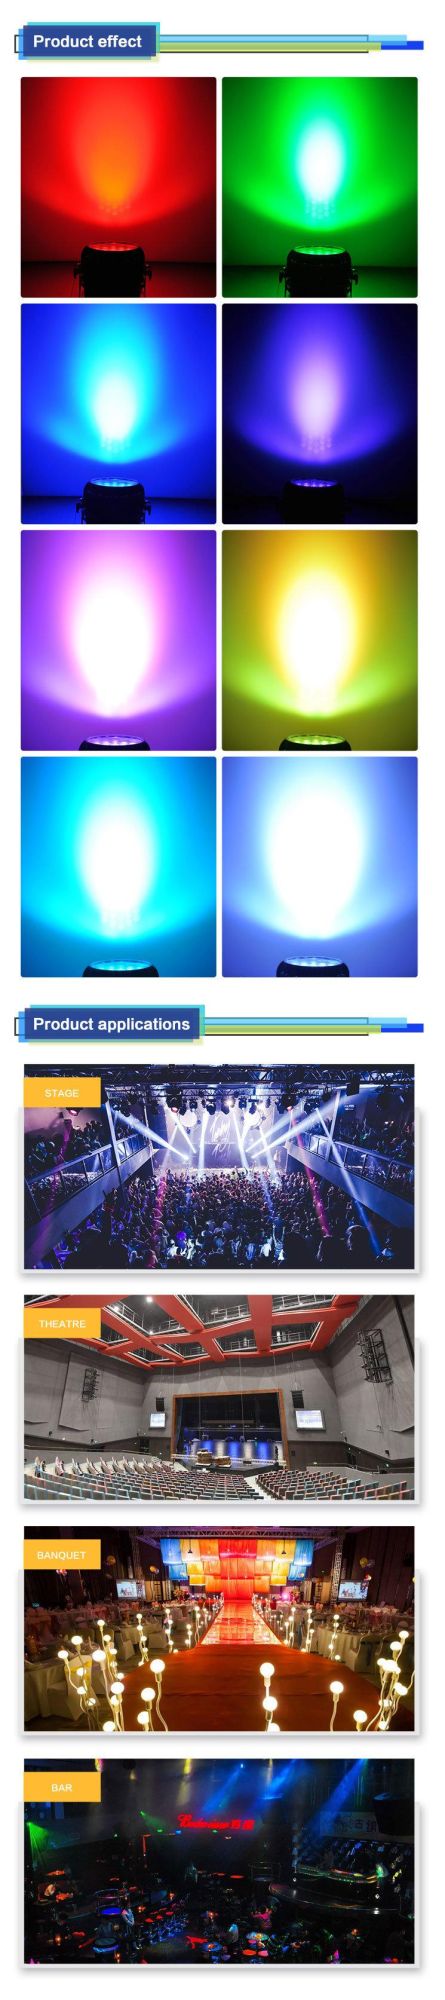 LED 18PCS Fullcolor Waterproof PAR Light with Zooming